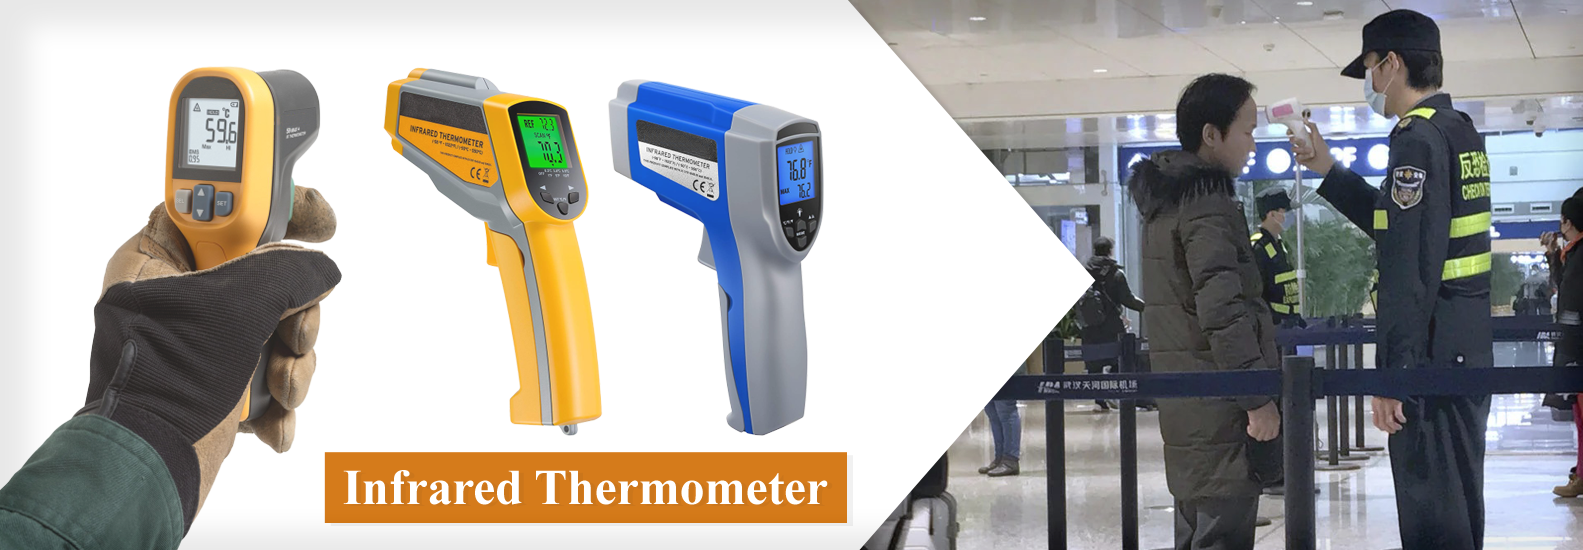 Infrared Thermometer - 4S Trading